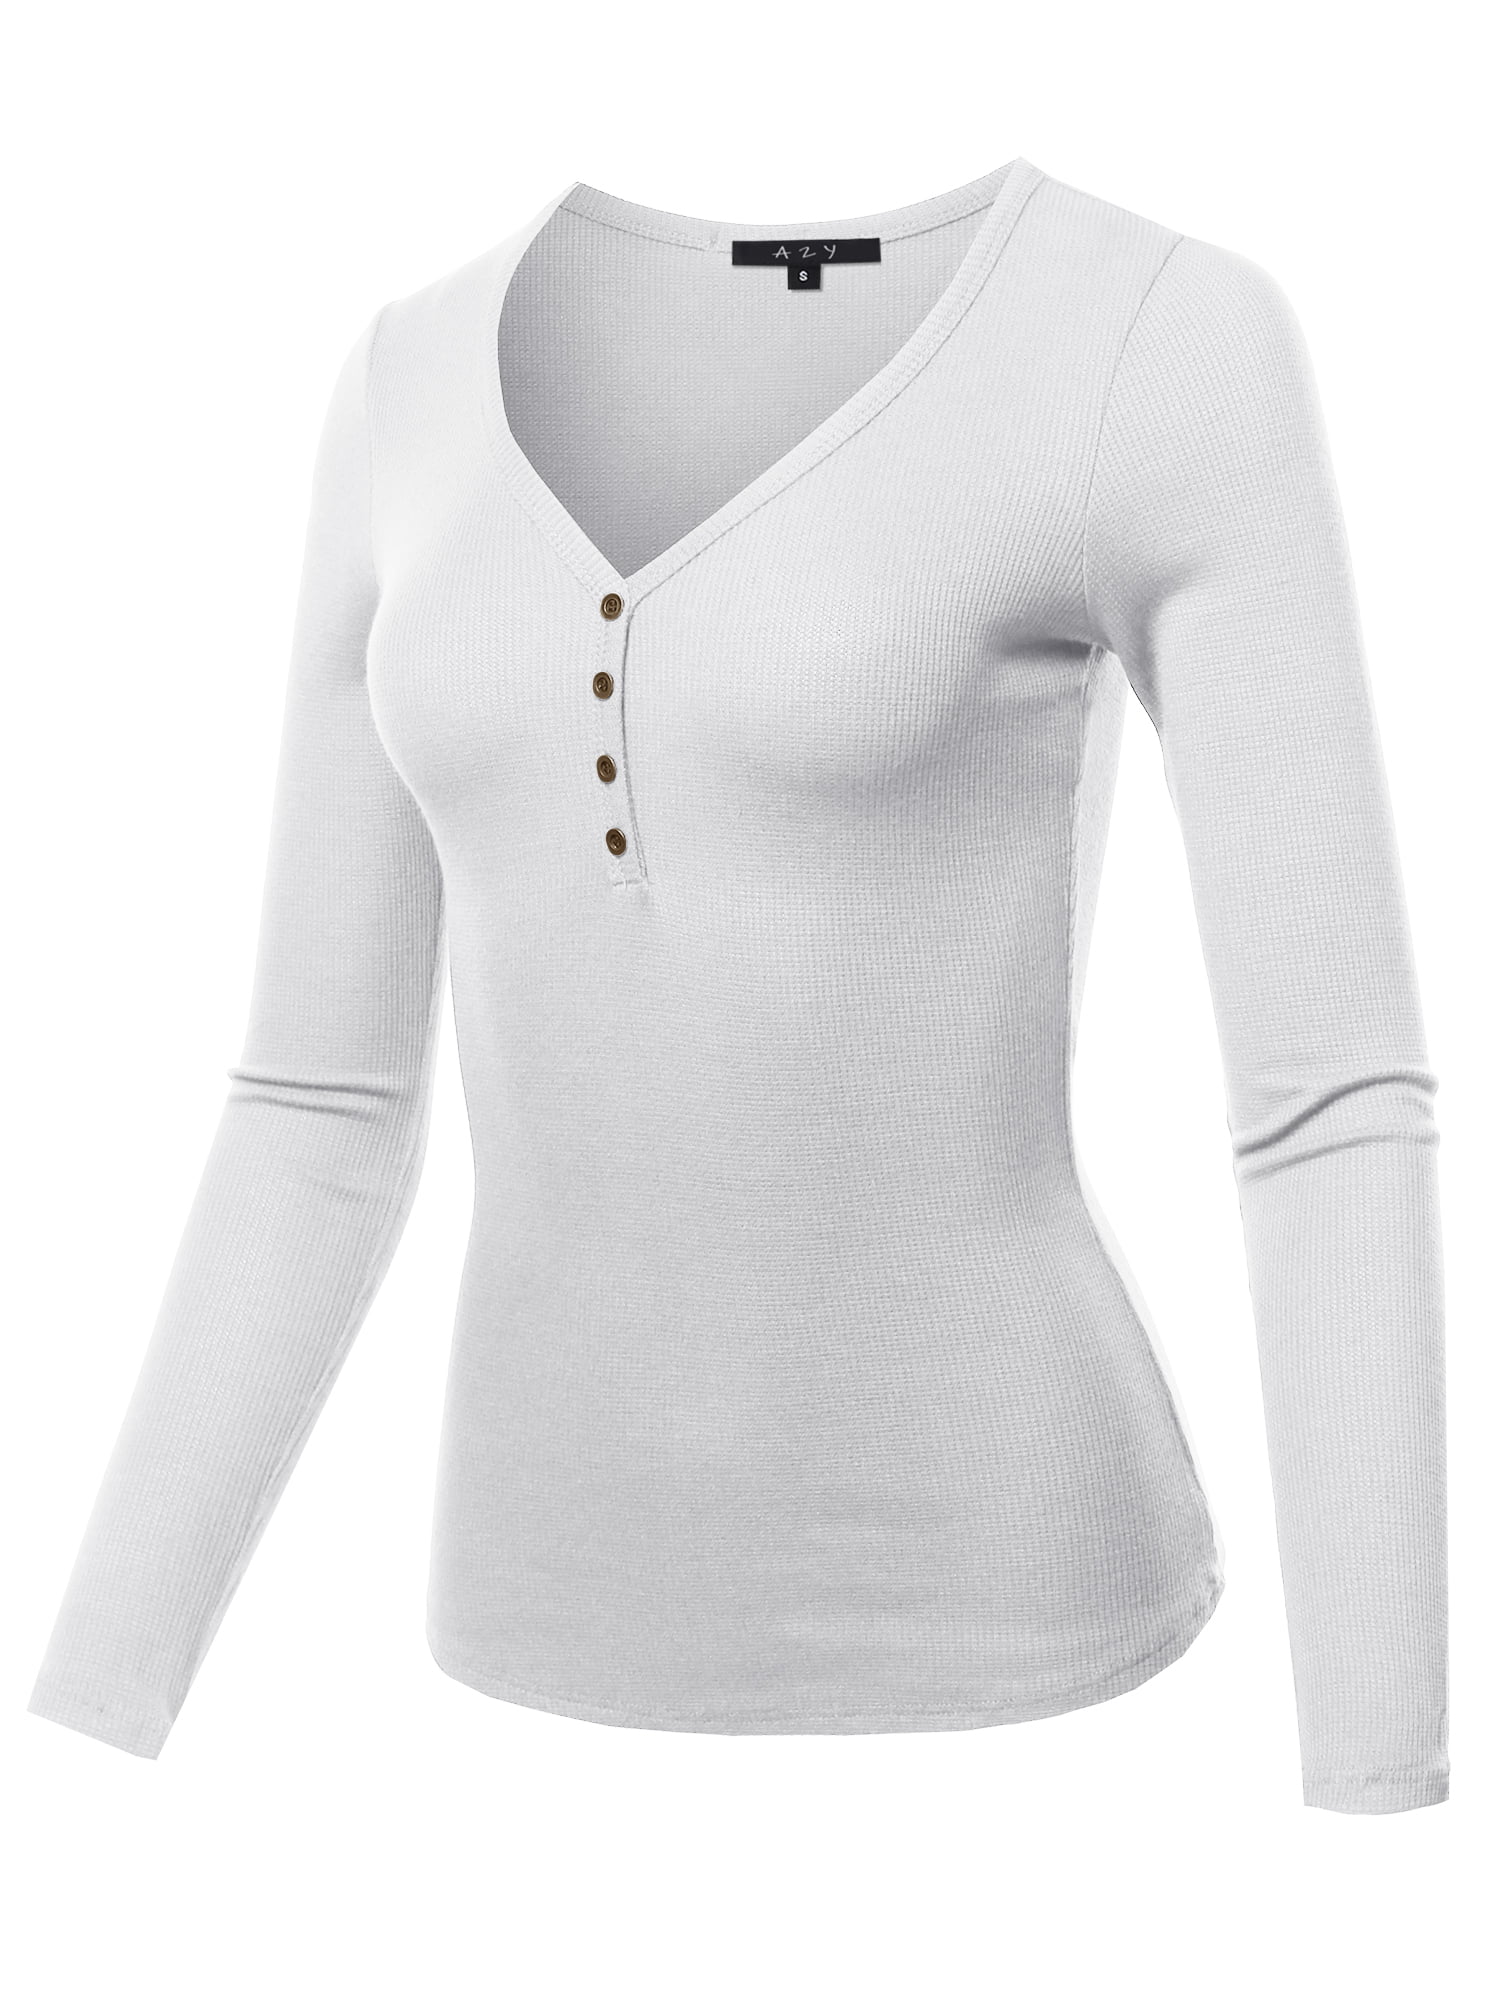 A2Y - A2Y Women's Lightweight Long Sleeve V-Neck Thermal Henley Tops ...